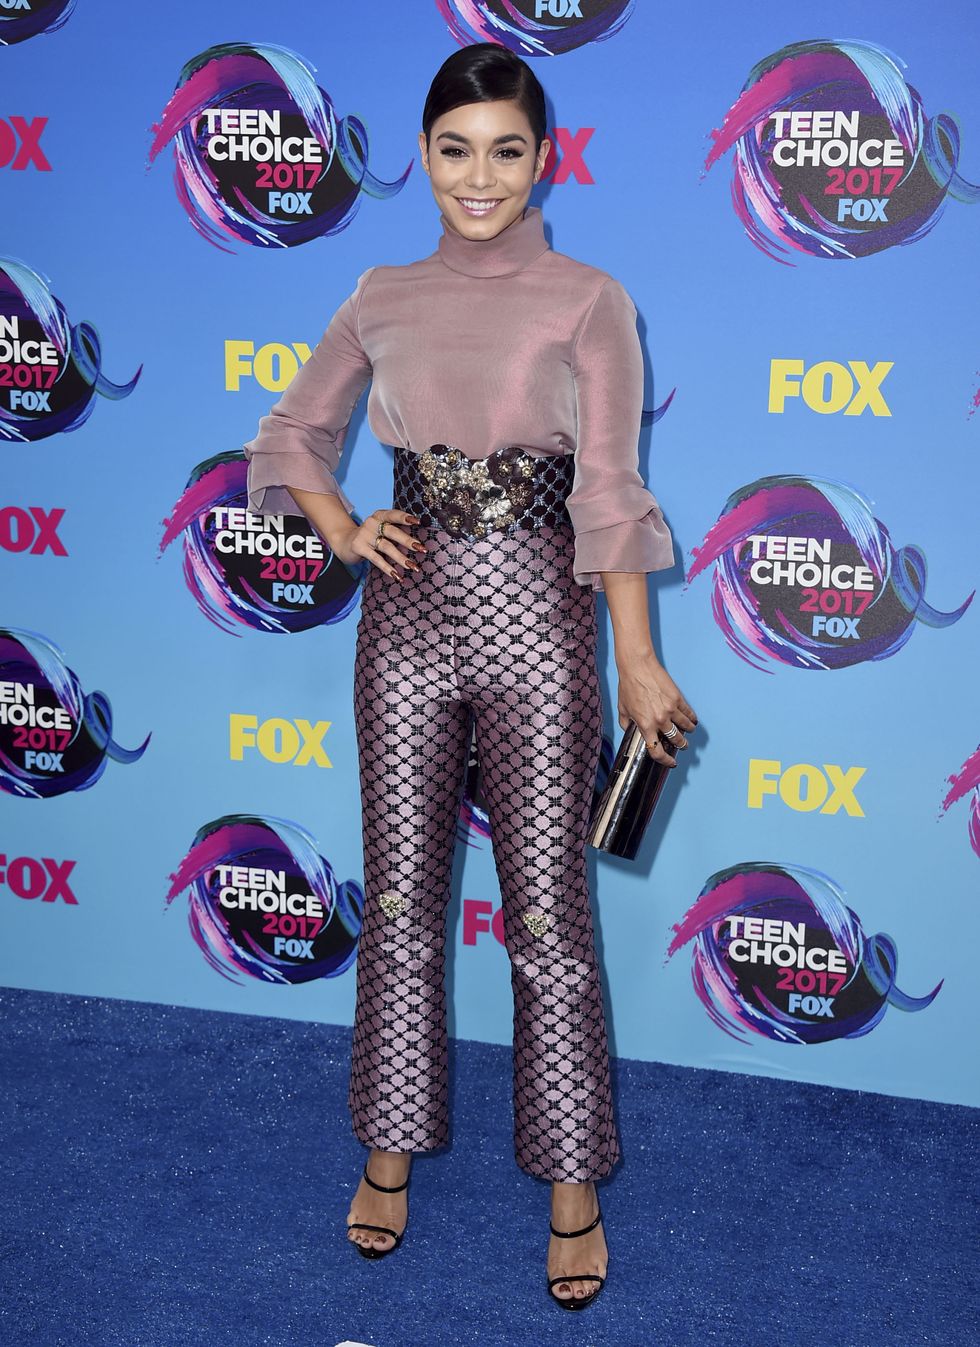 Actress and singer Vanessa Hudgens at the Teen Choice Awards on Sunday, Aug. 13, 2017, in Los Angeles